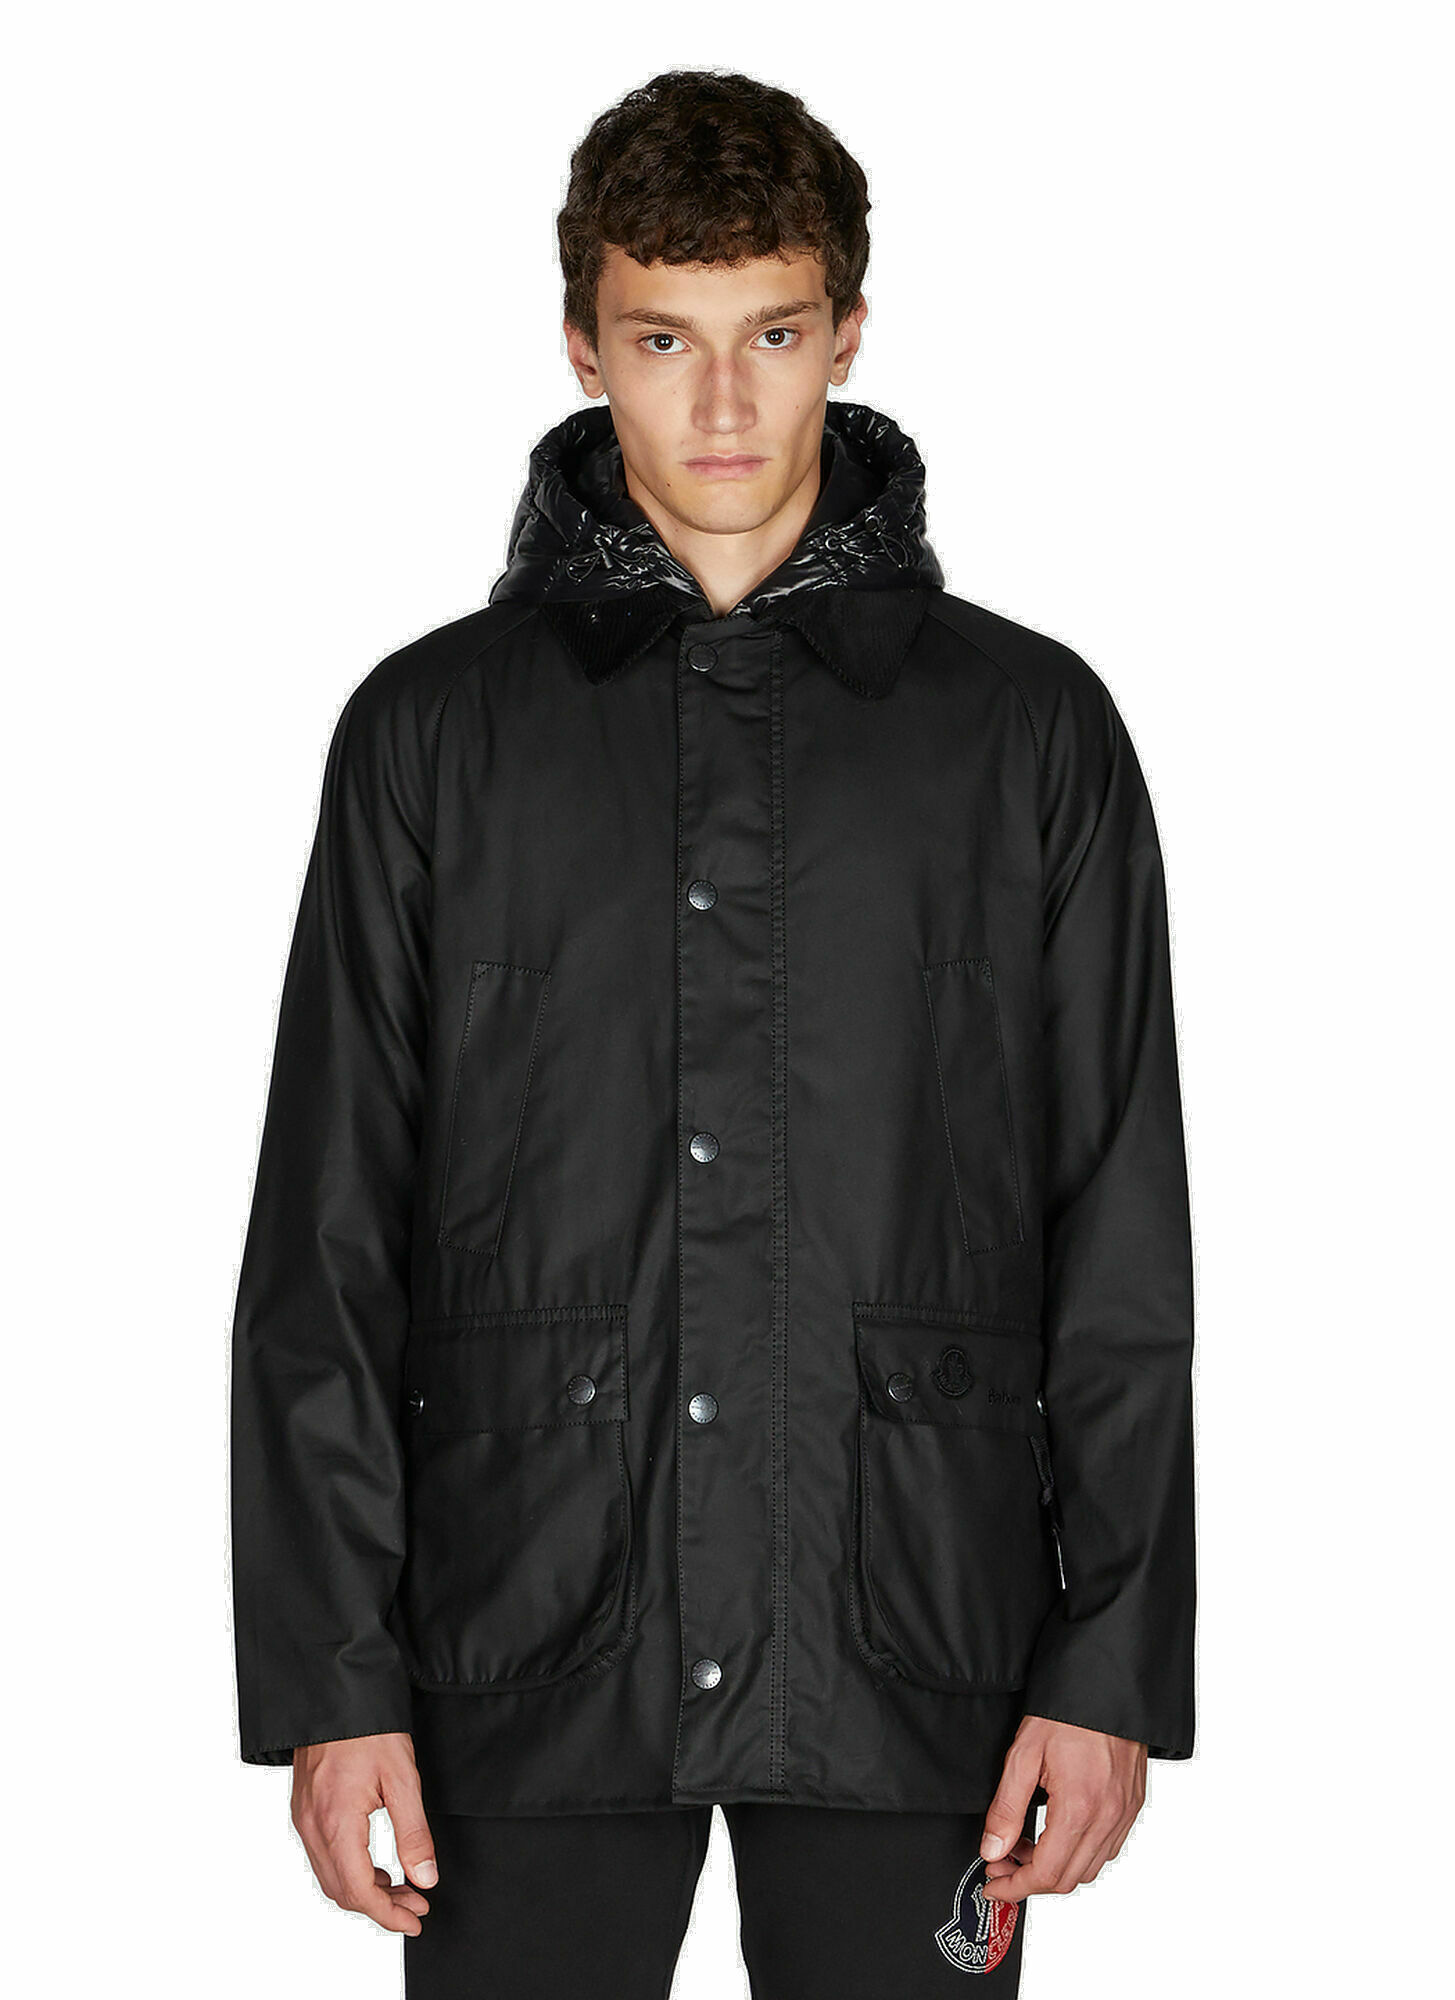 x Barbour Wight Waxed Jacket in Black Moncler